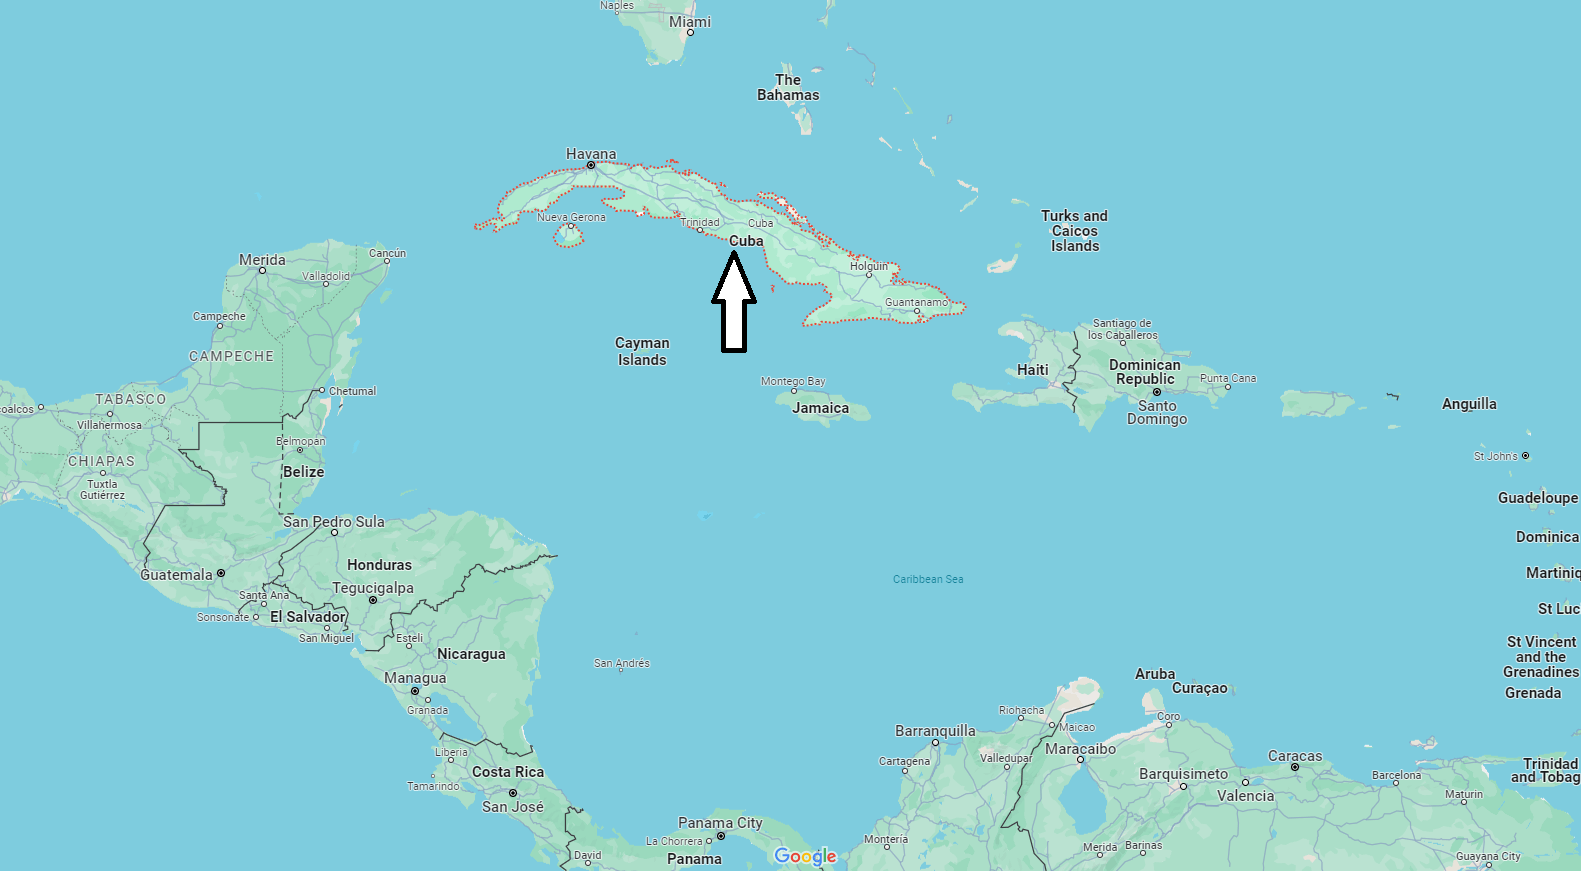 Is Cuba part of South or North America